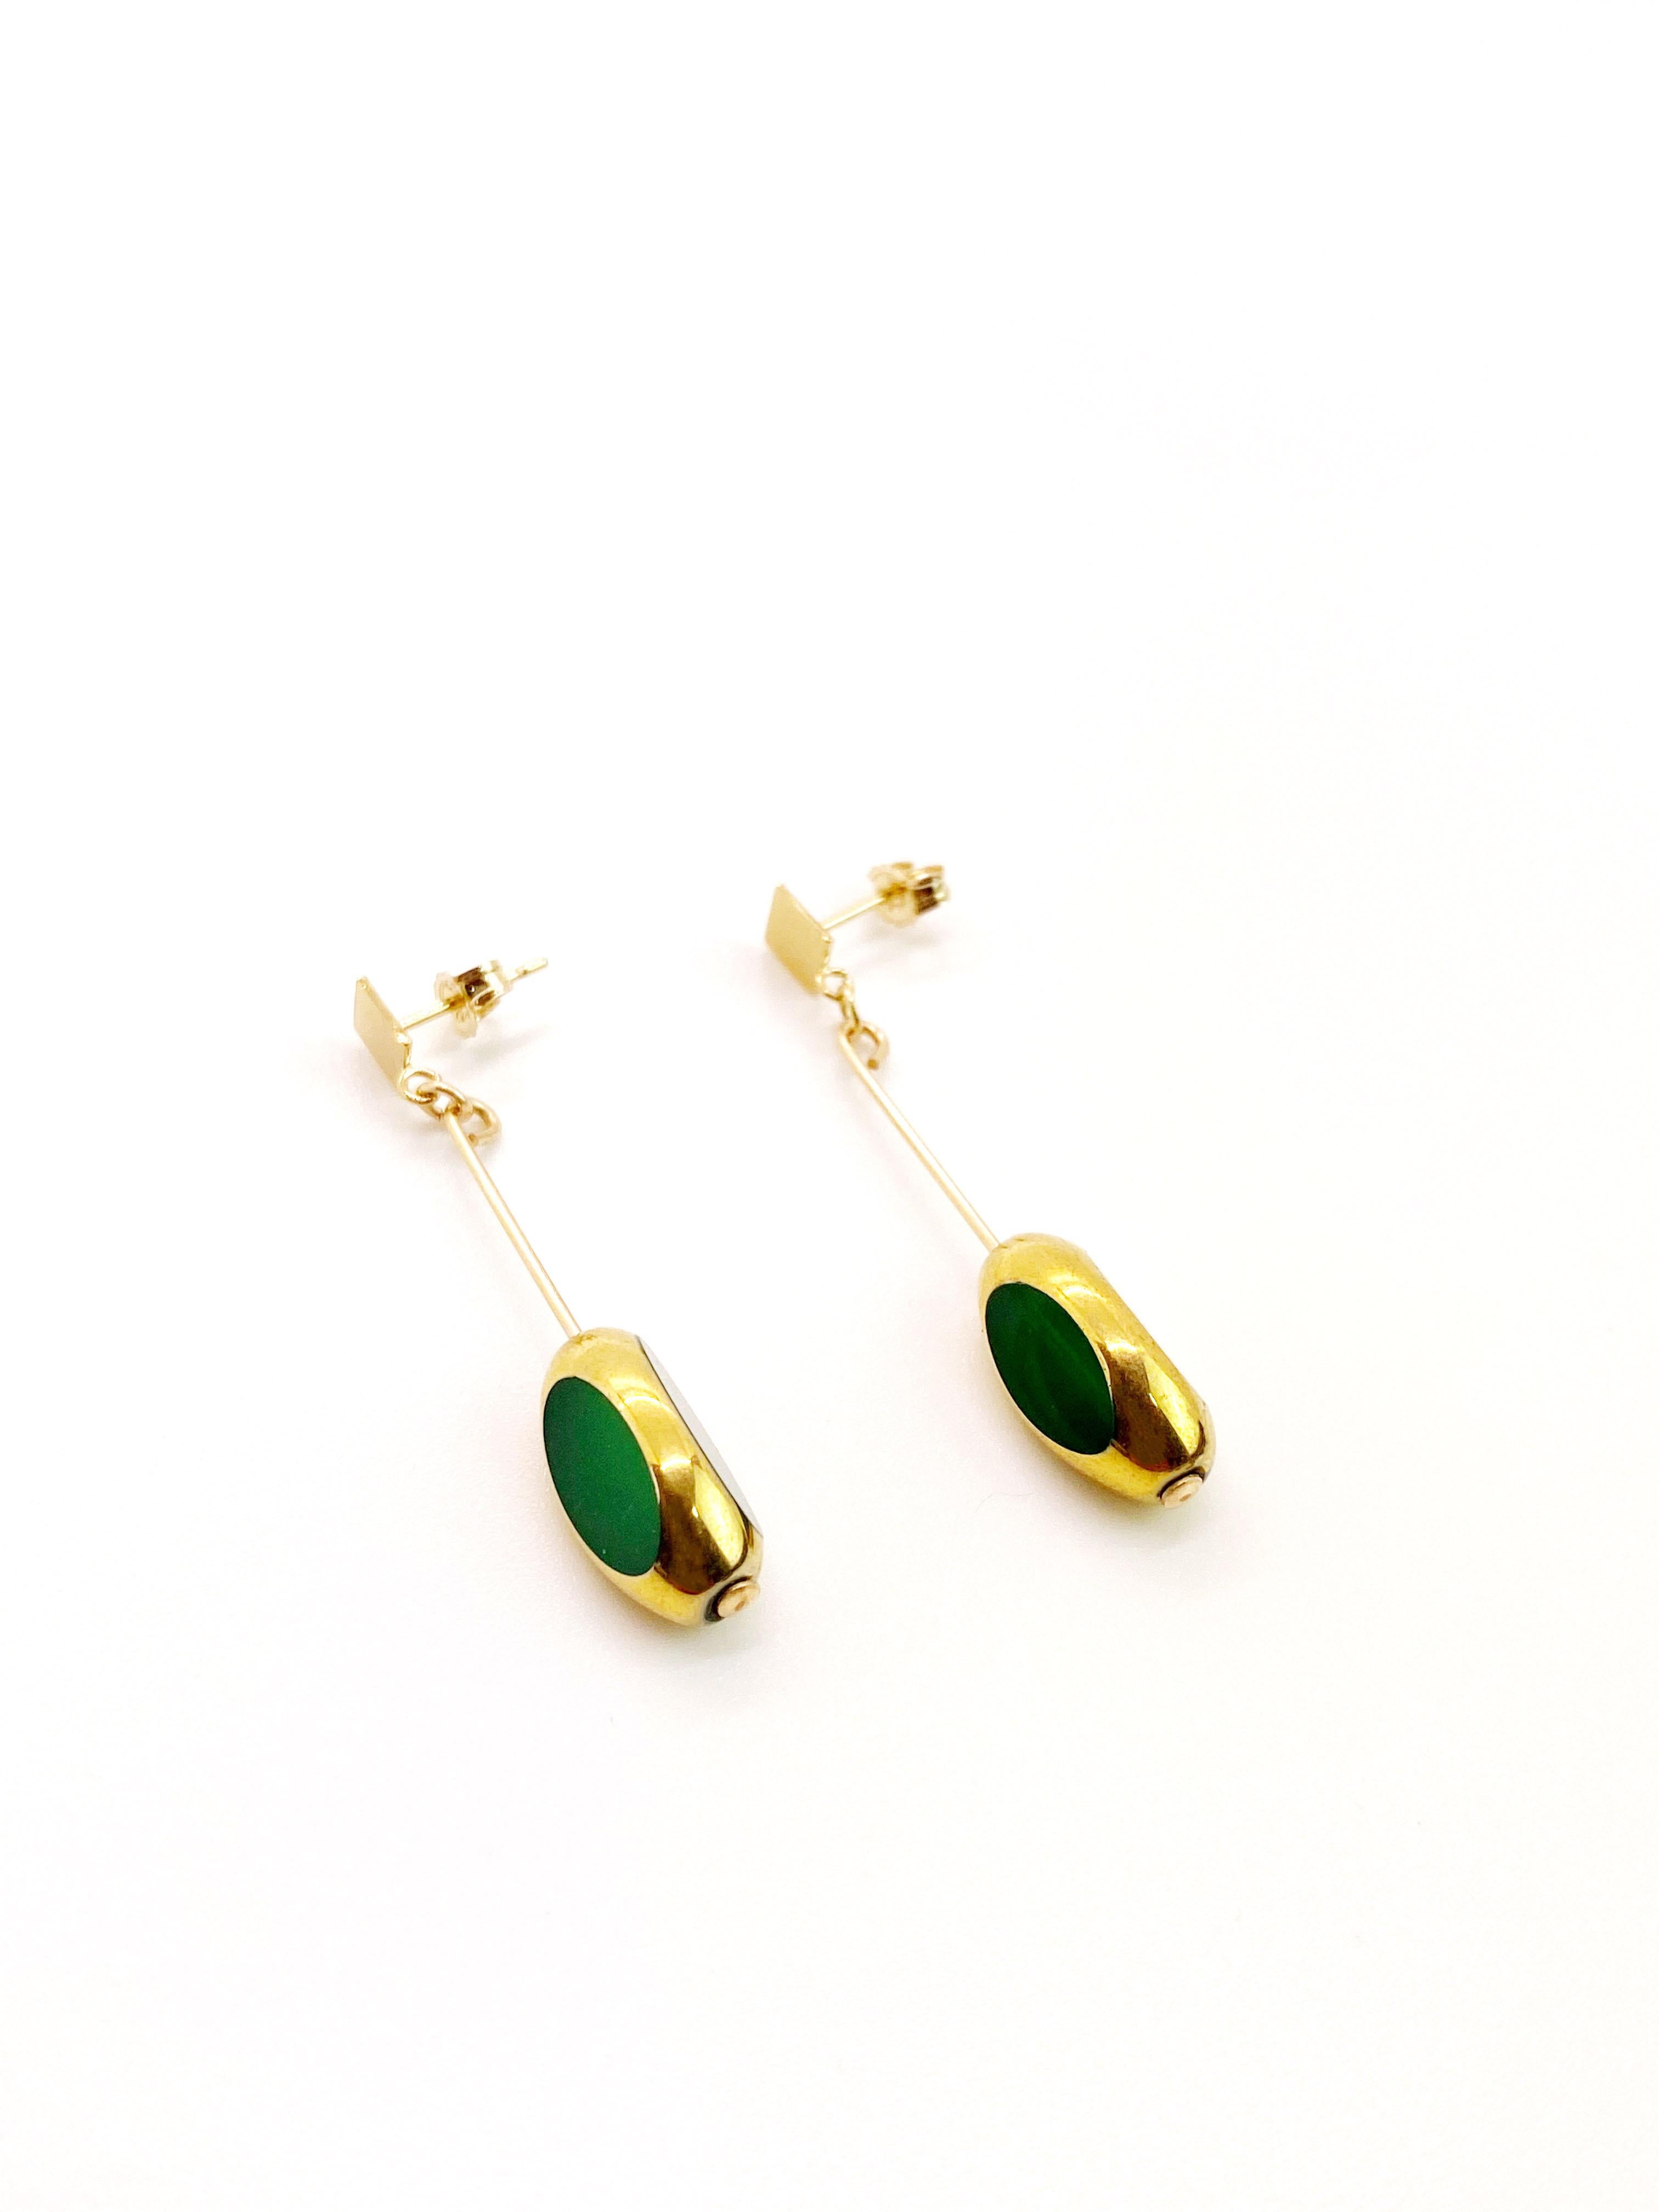 Green vintage German glass window beads edged with 24K gold dangles on a 14K gold filled ear wire. 

The German vintage glass beads are considered rare and collectible, circa 1920s-1960s.